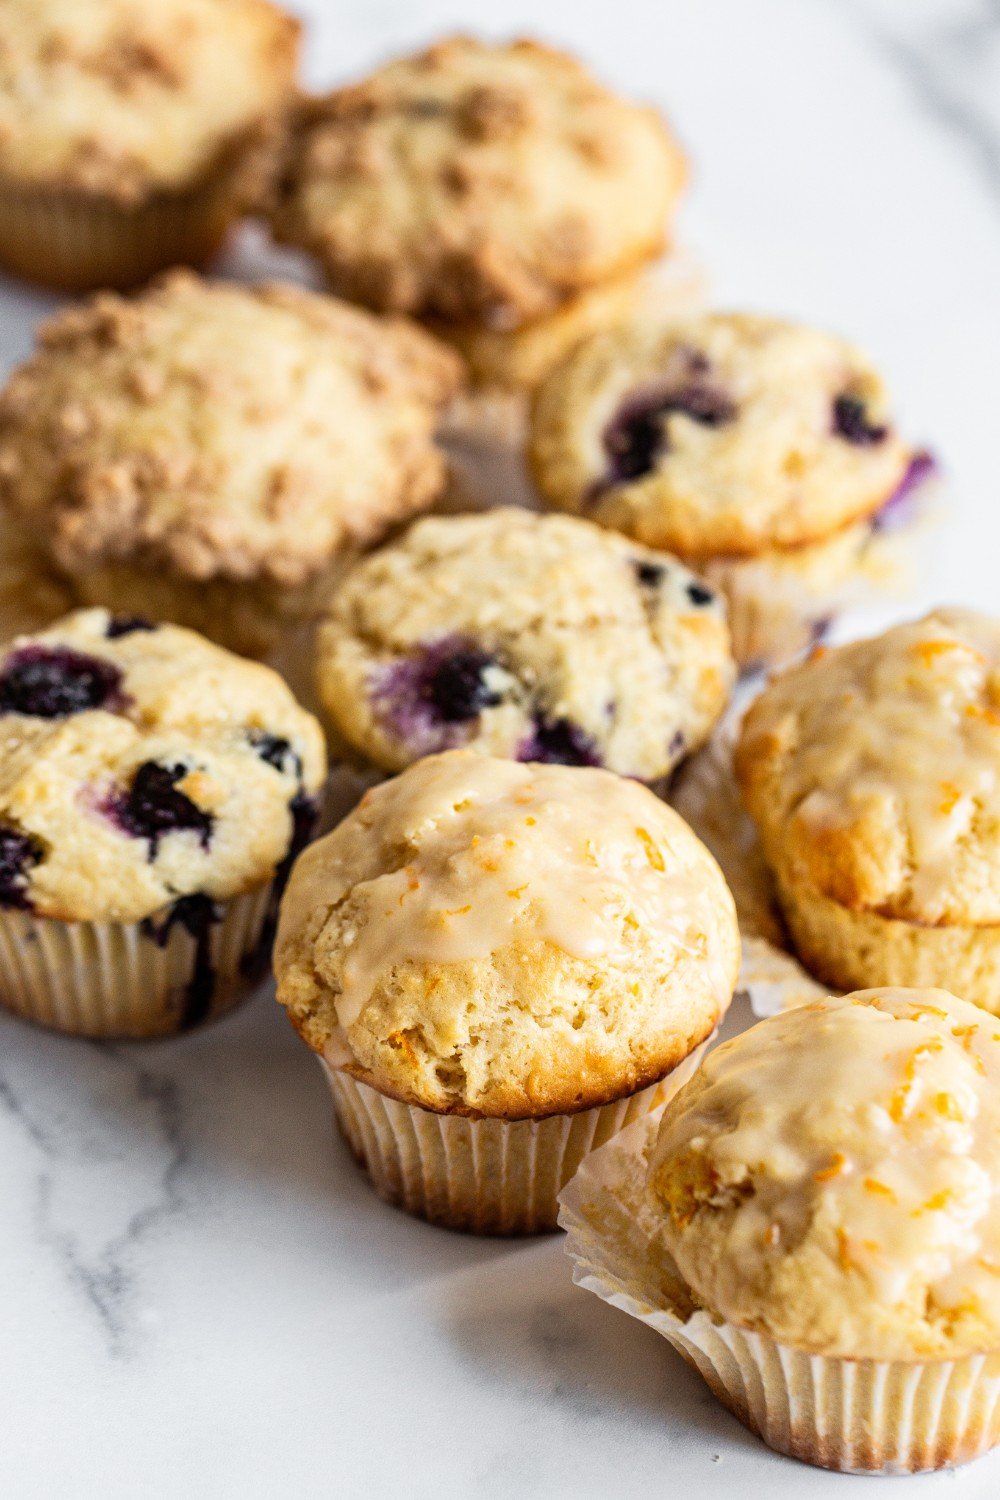 several blueberry muffins and several glazed orange muffins.